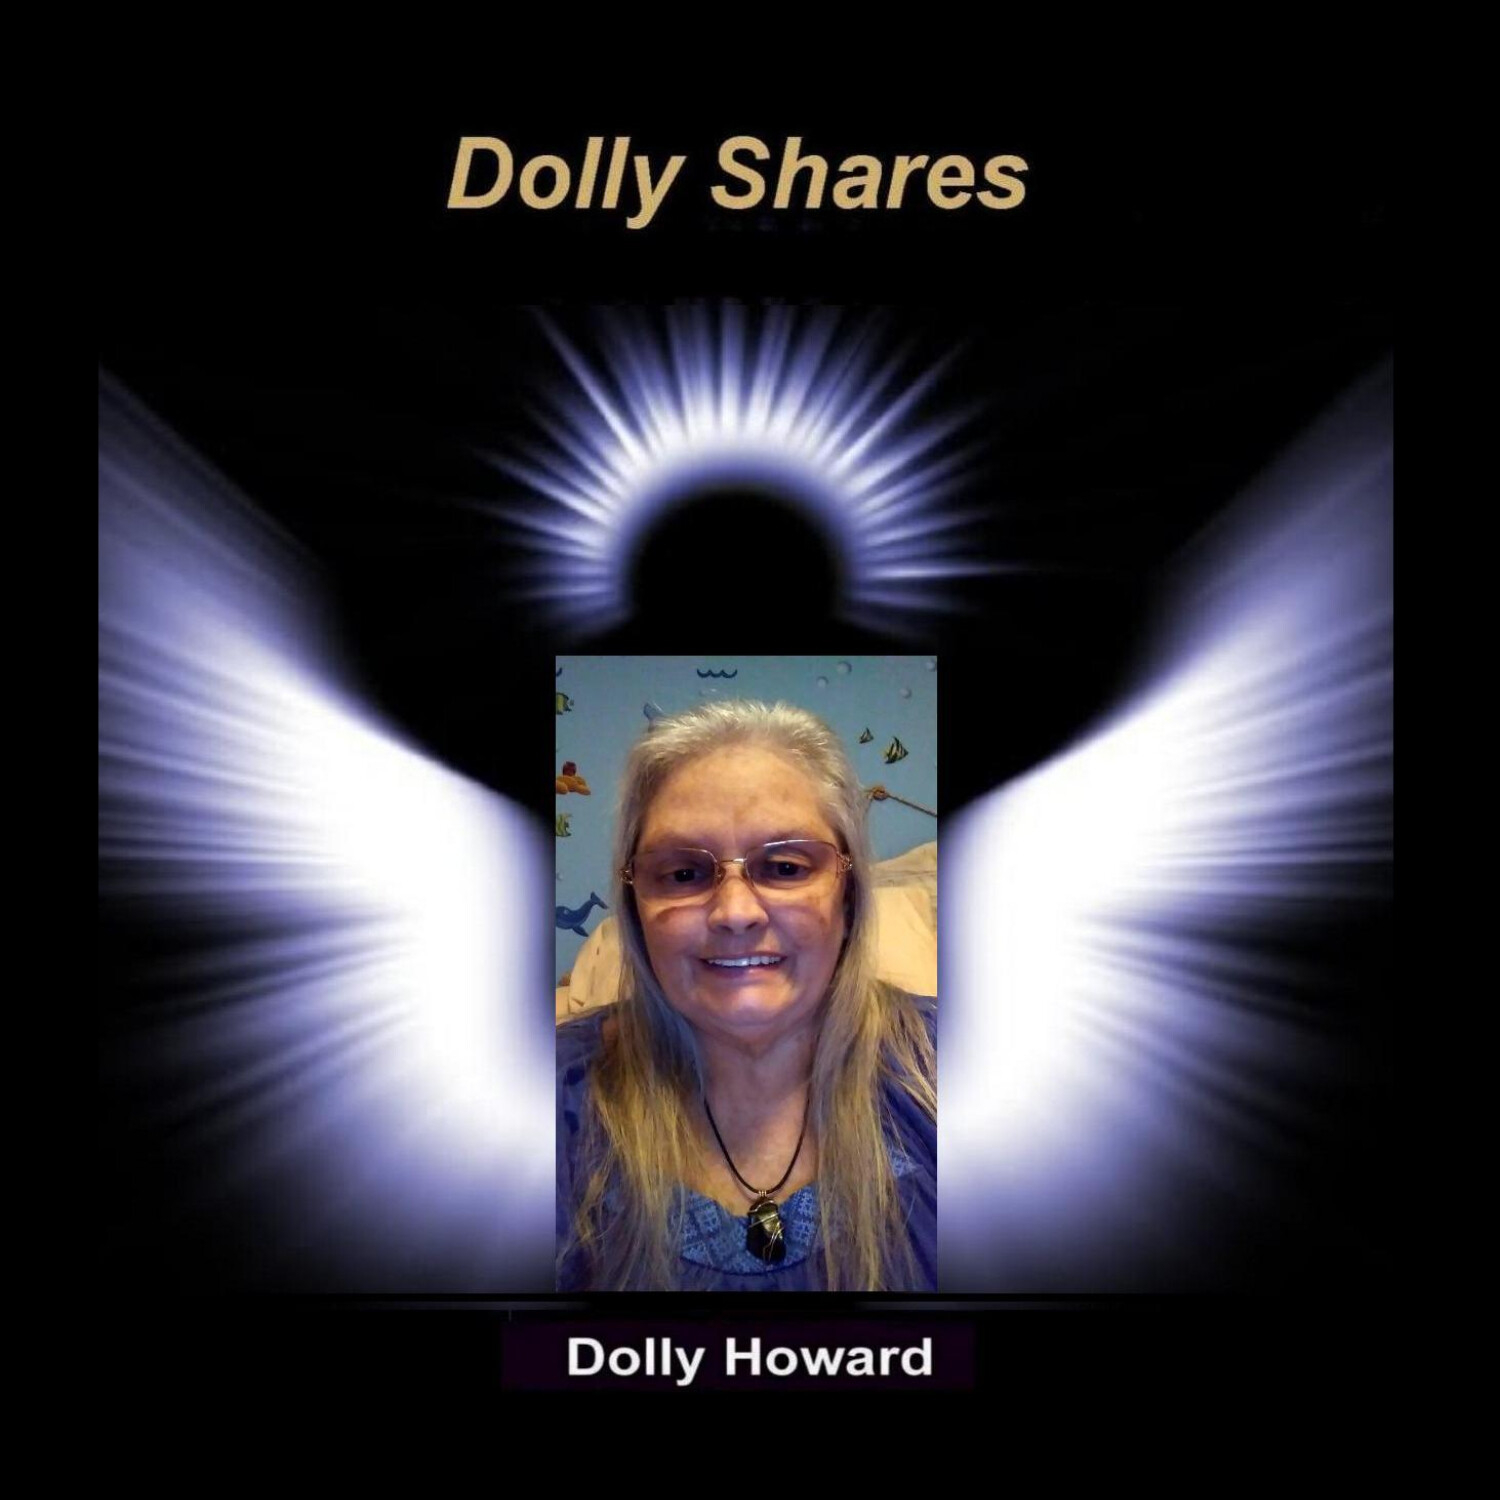 Dolly Shares 3/20/18 - Sick Loved Ones